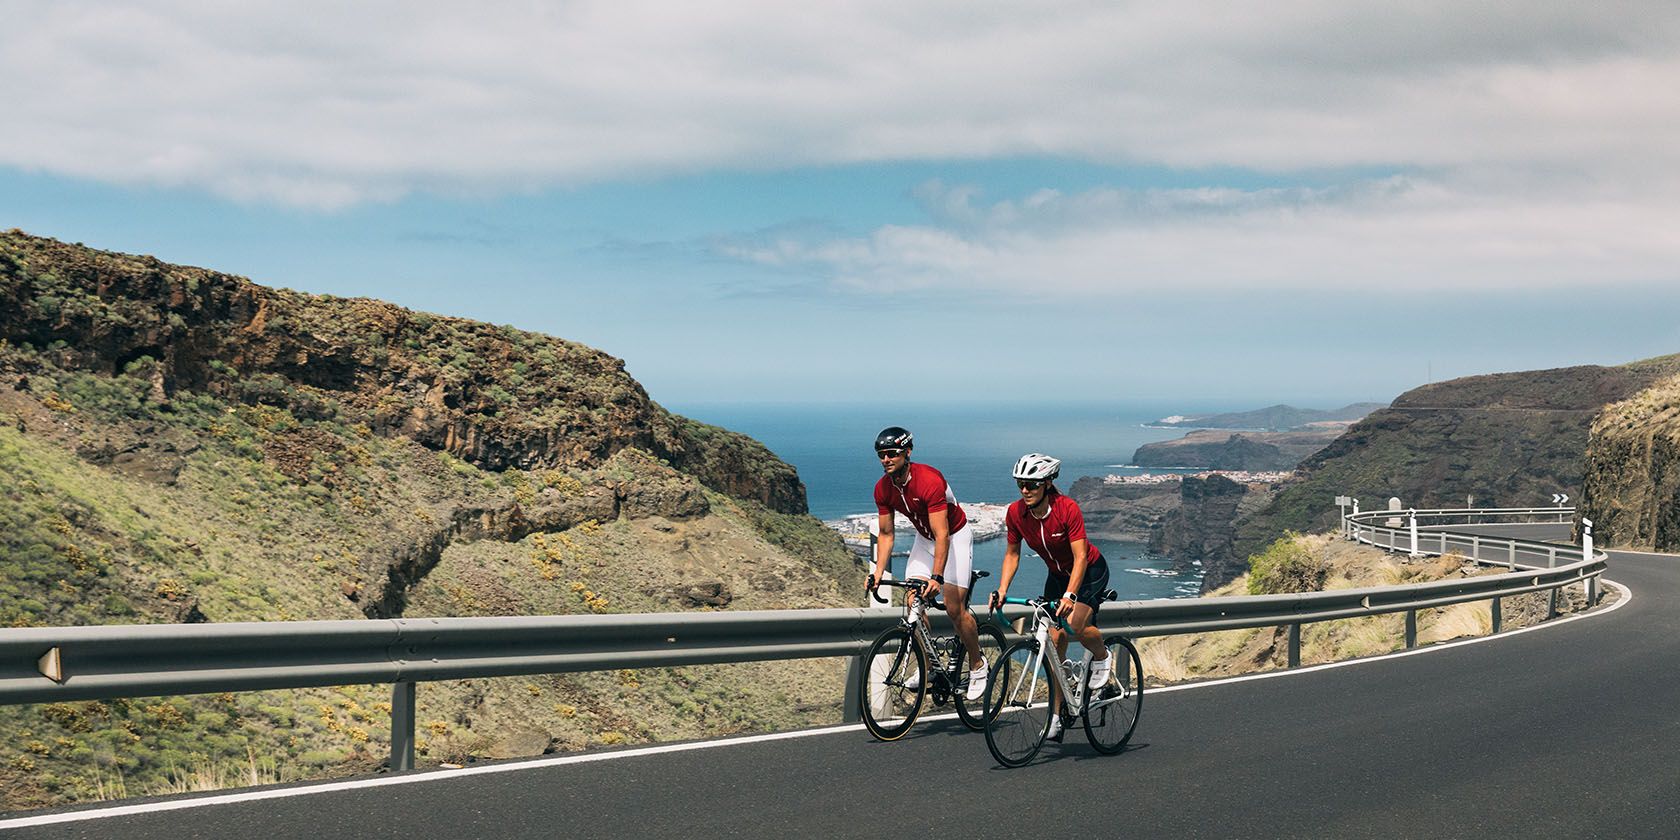 Two road cyclists on a winding road